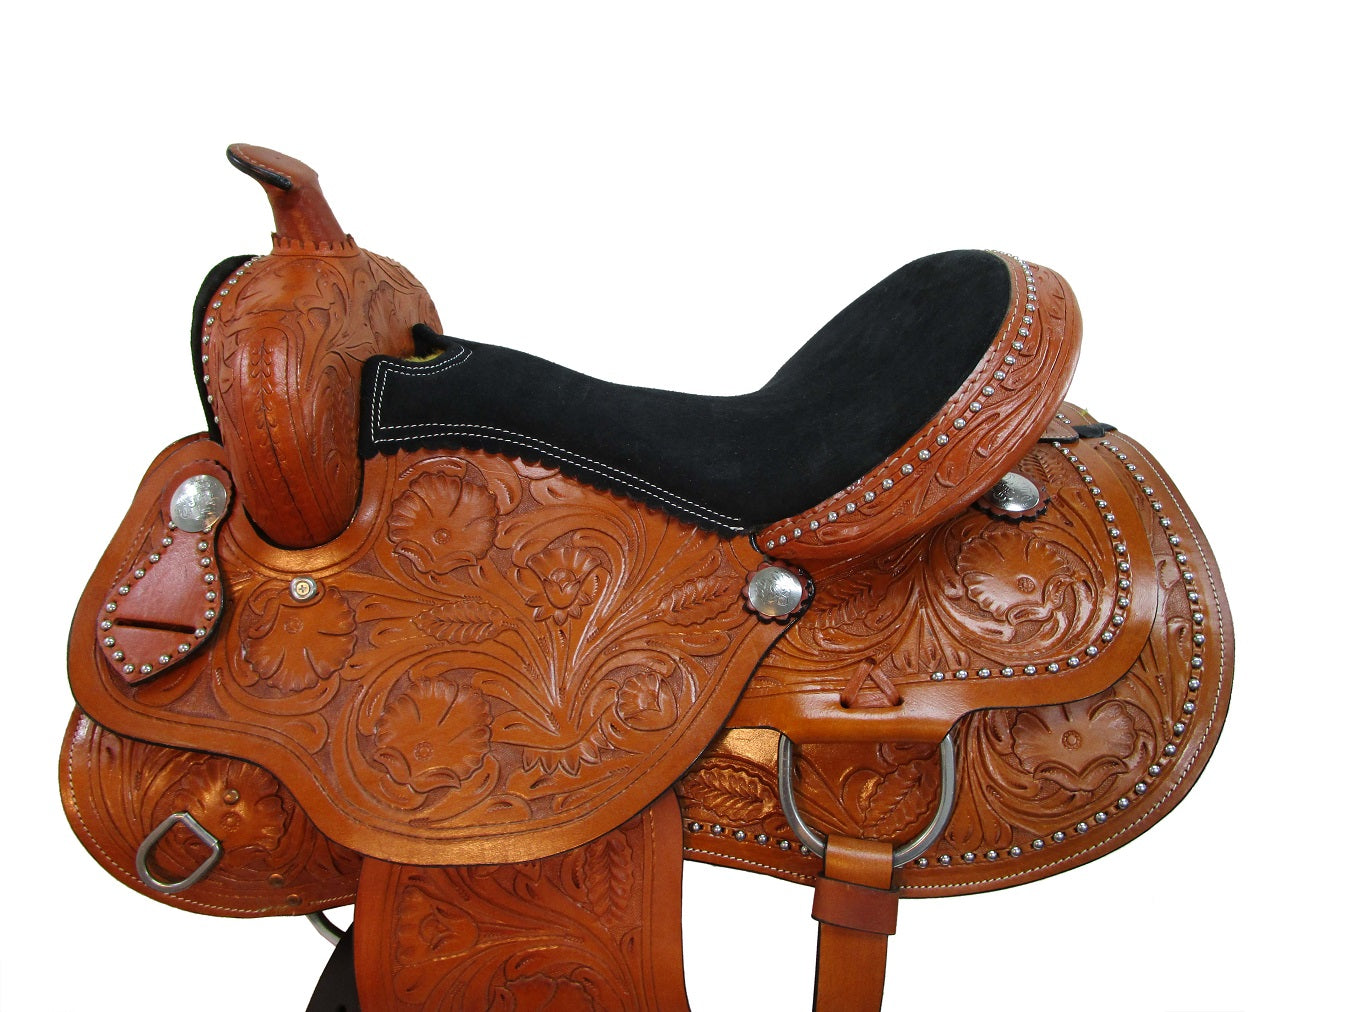 RAHMAT International Barrel Racing Trail Adult Premium Leather Horse Saddle  TREELESS SEAT Available TACK Size 10" To 18" INCHES. (17"inch) その他犬用品 